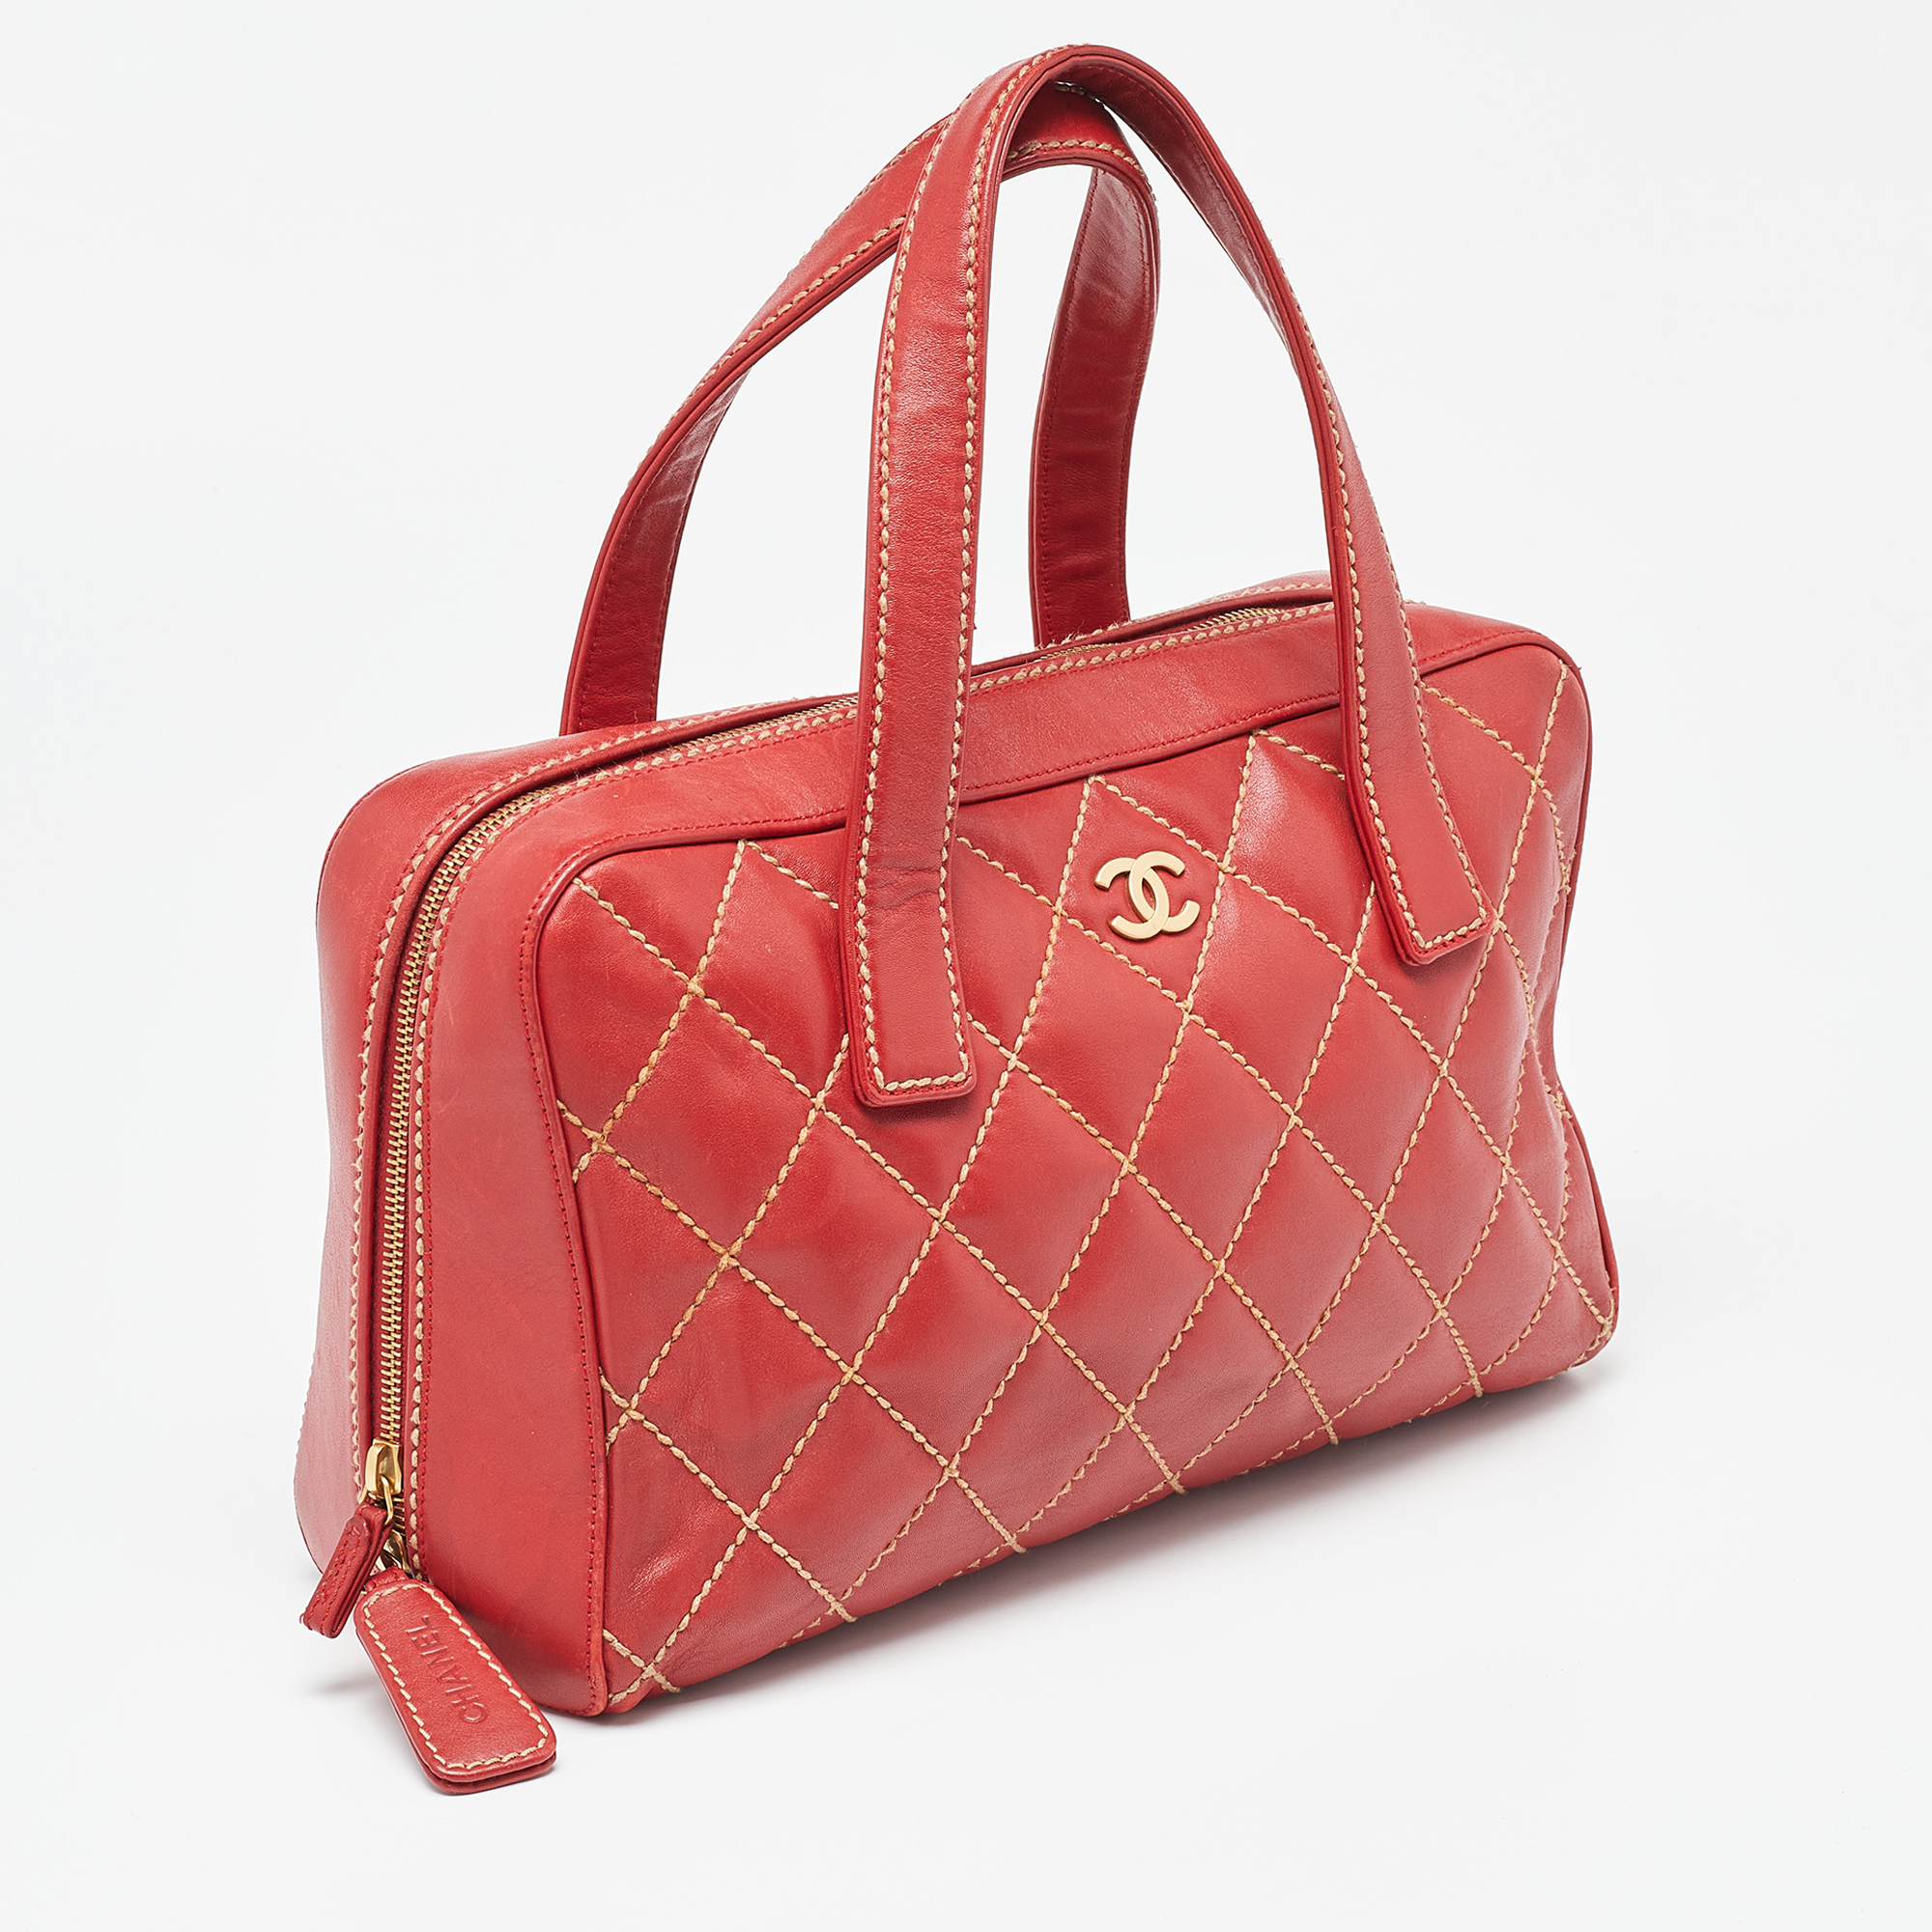 Chanel Red Quilted Leather Surpique Bowler Bag